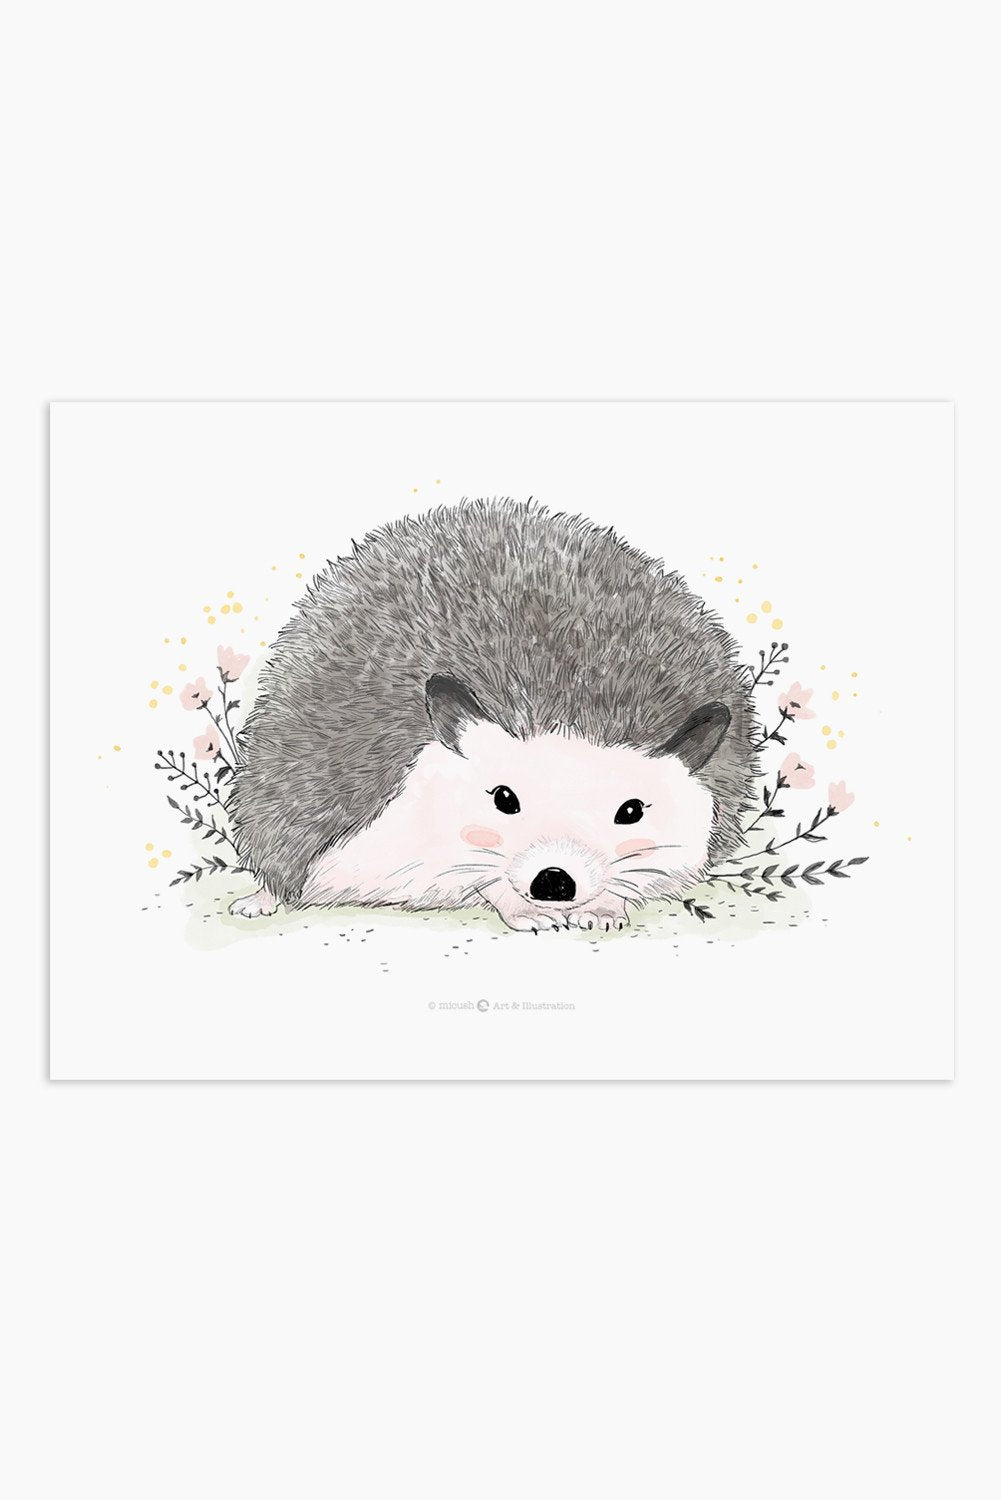 Art Print - Spring Hedgehog - Available Only In Israel!